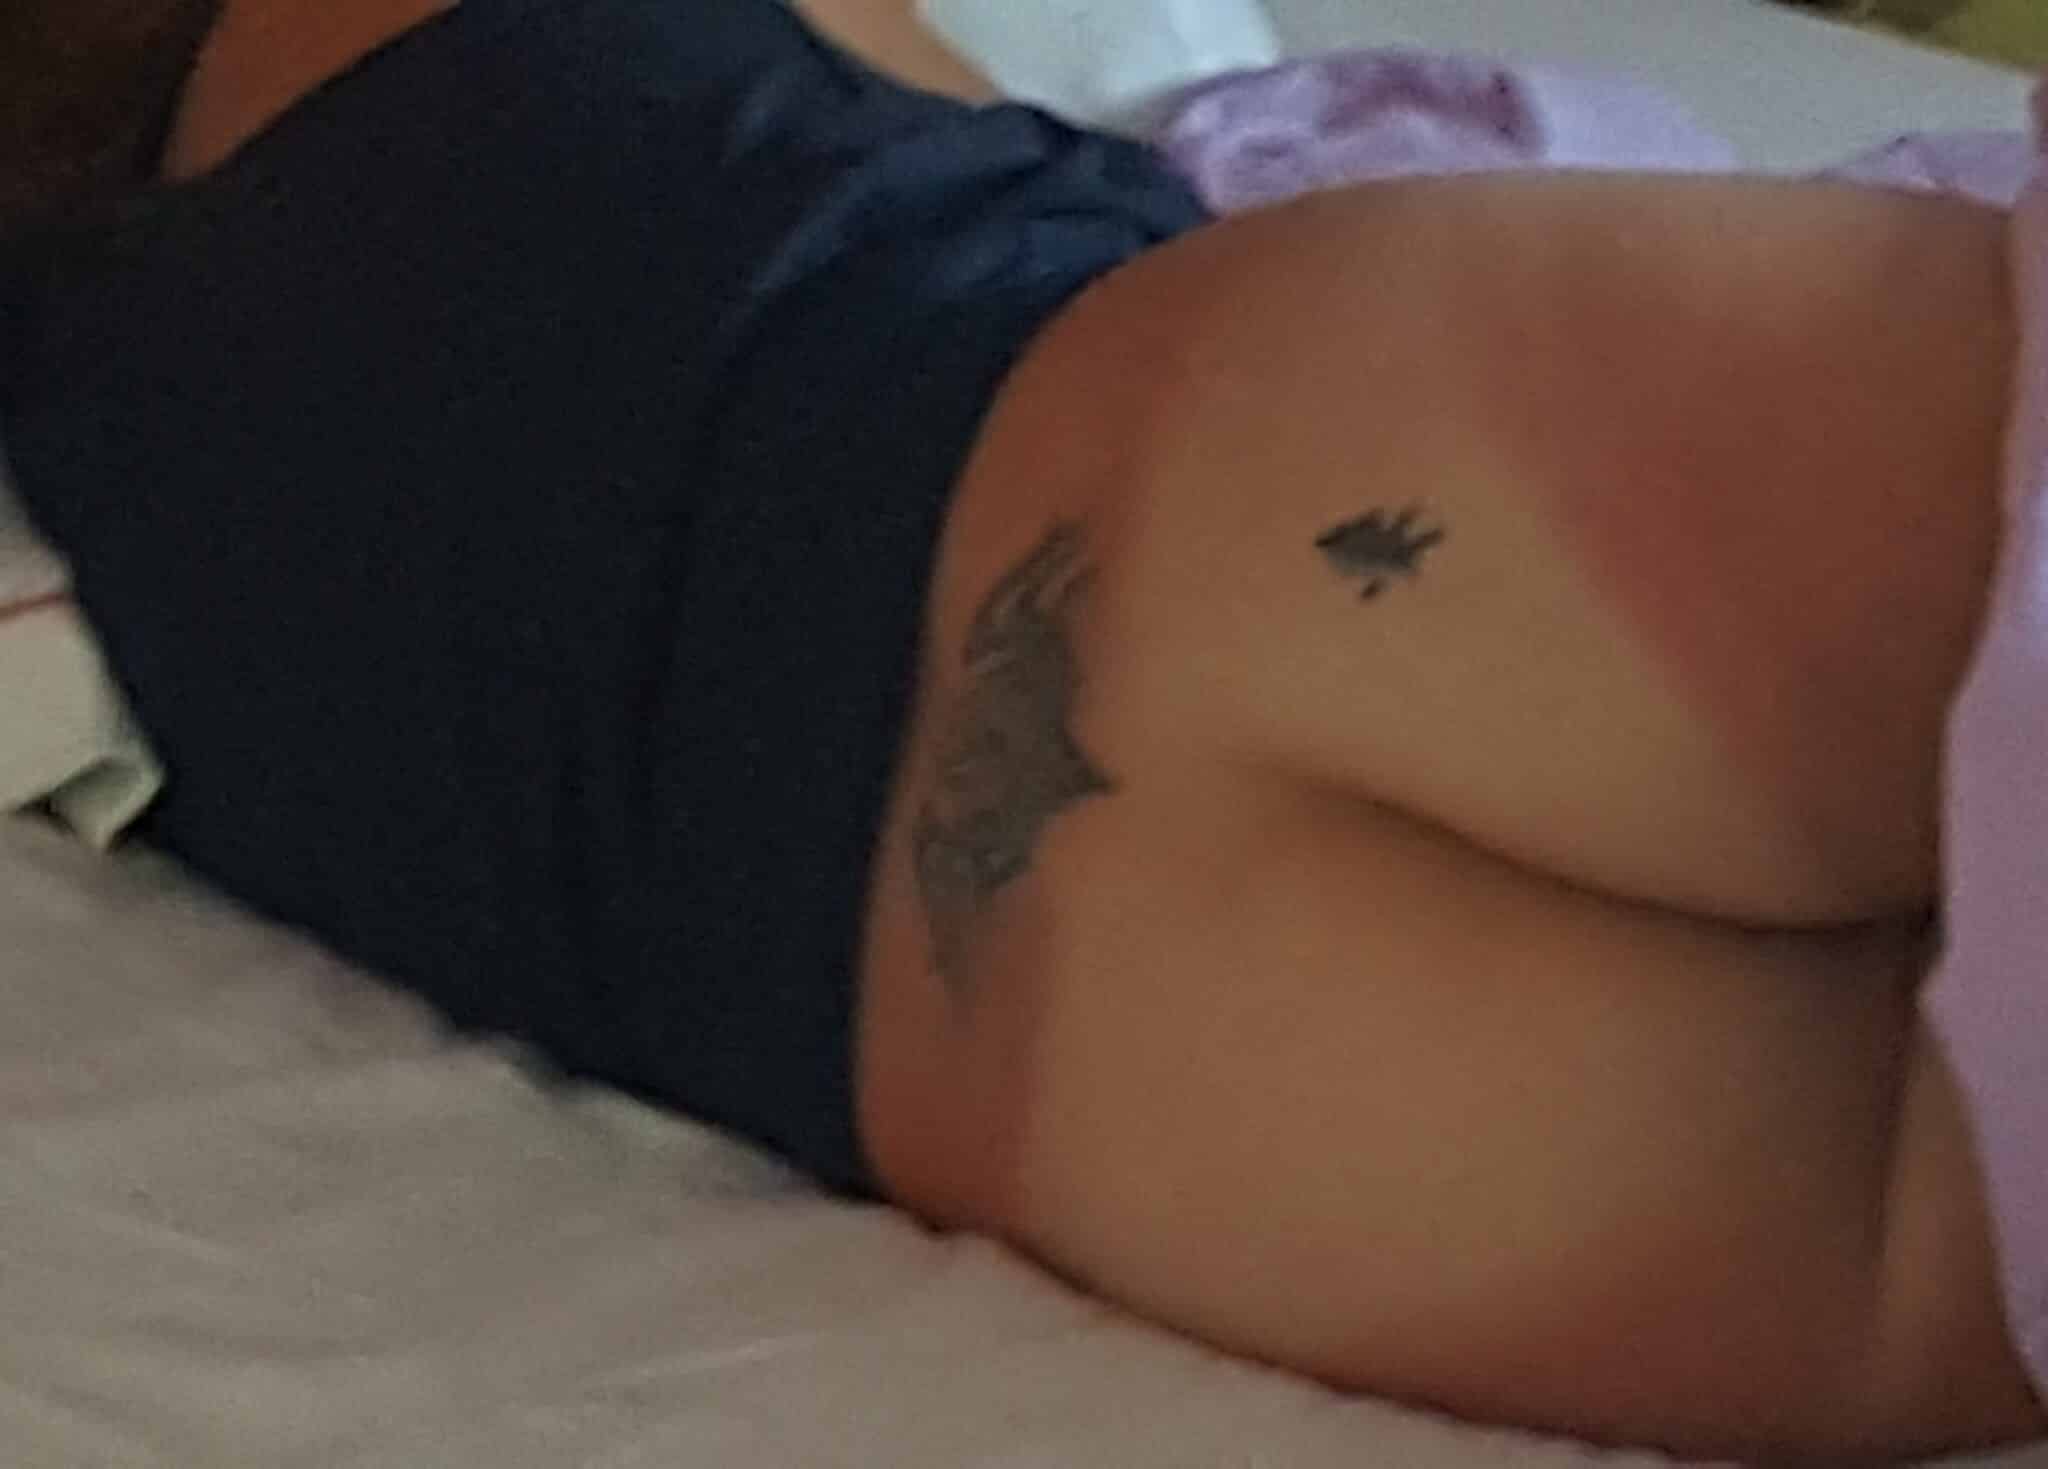 Tramp stamp Ass Flash Pics, MILF Flashing Pics, No Panties Pics, Real Amateurs from Google, Tumblr, Pinterest, Facebook, Twitter, Instagram and Snapchat.